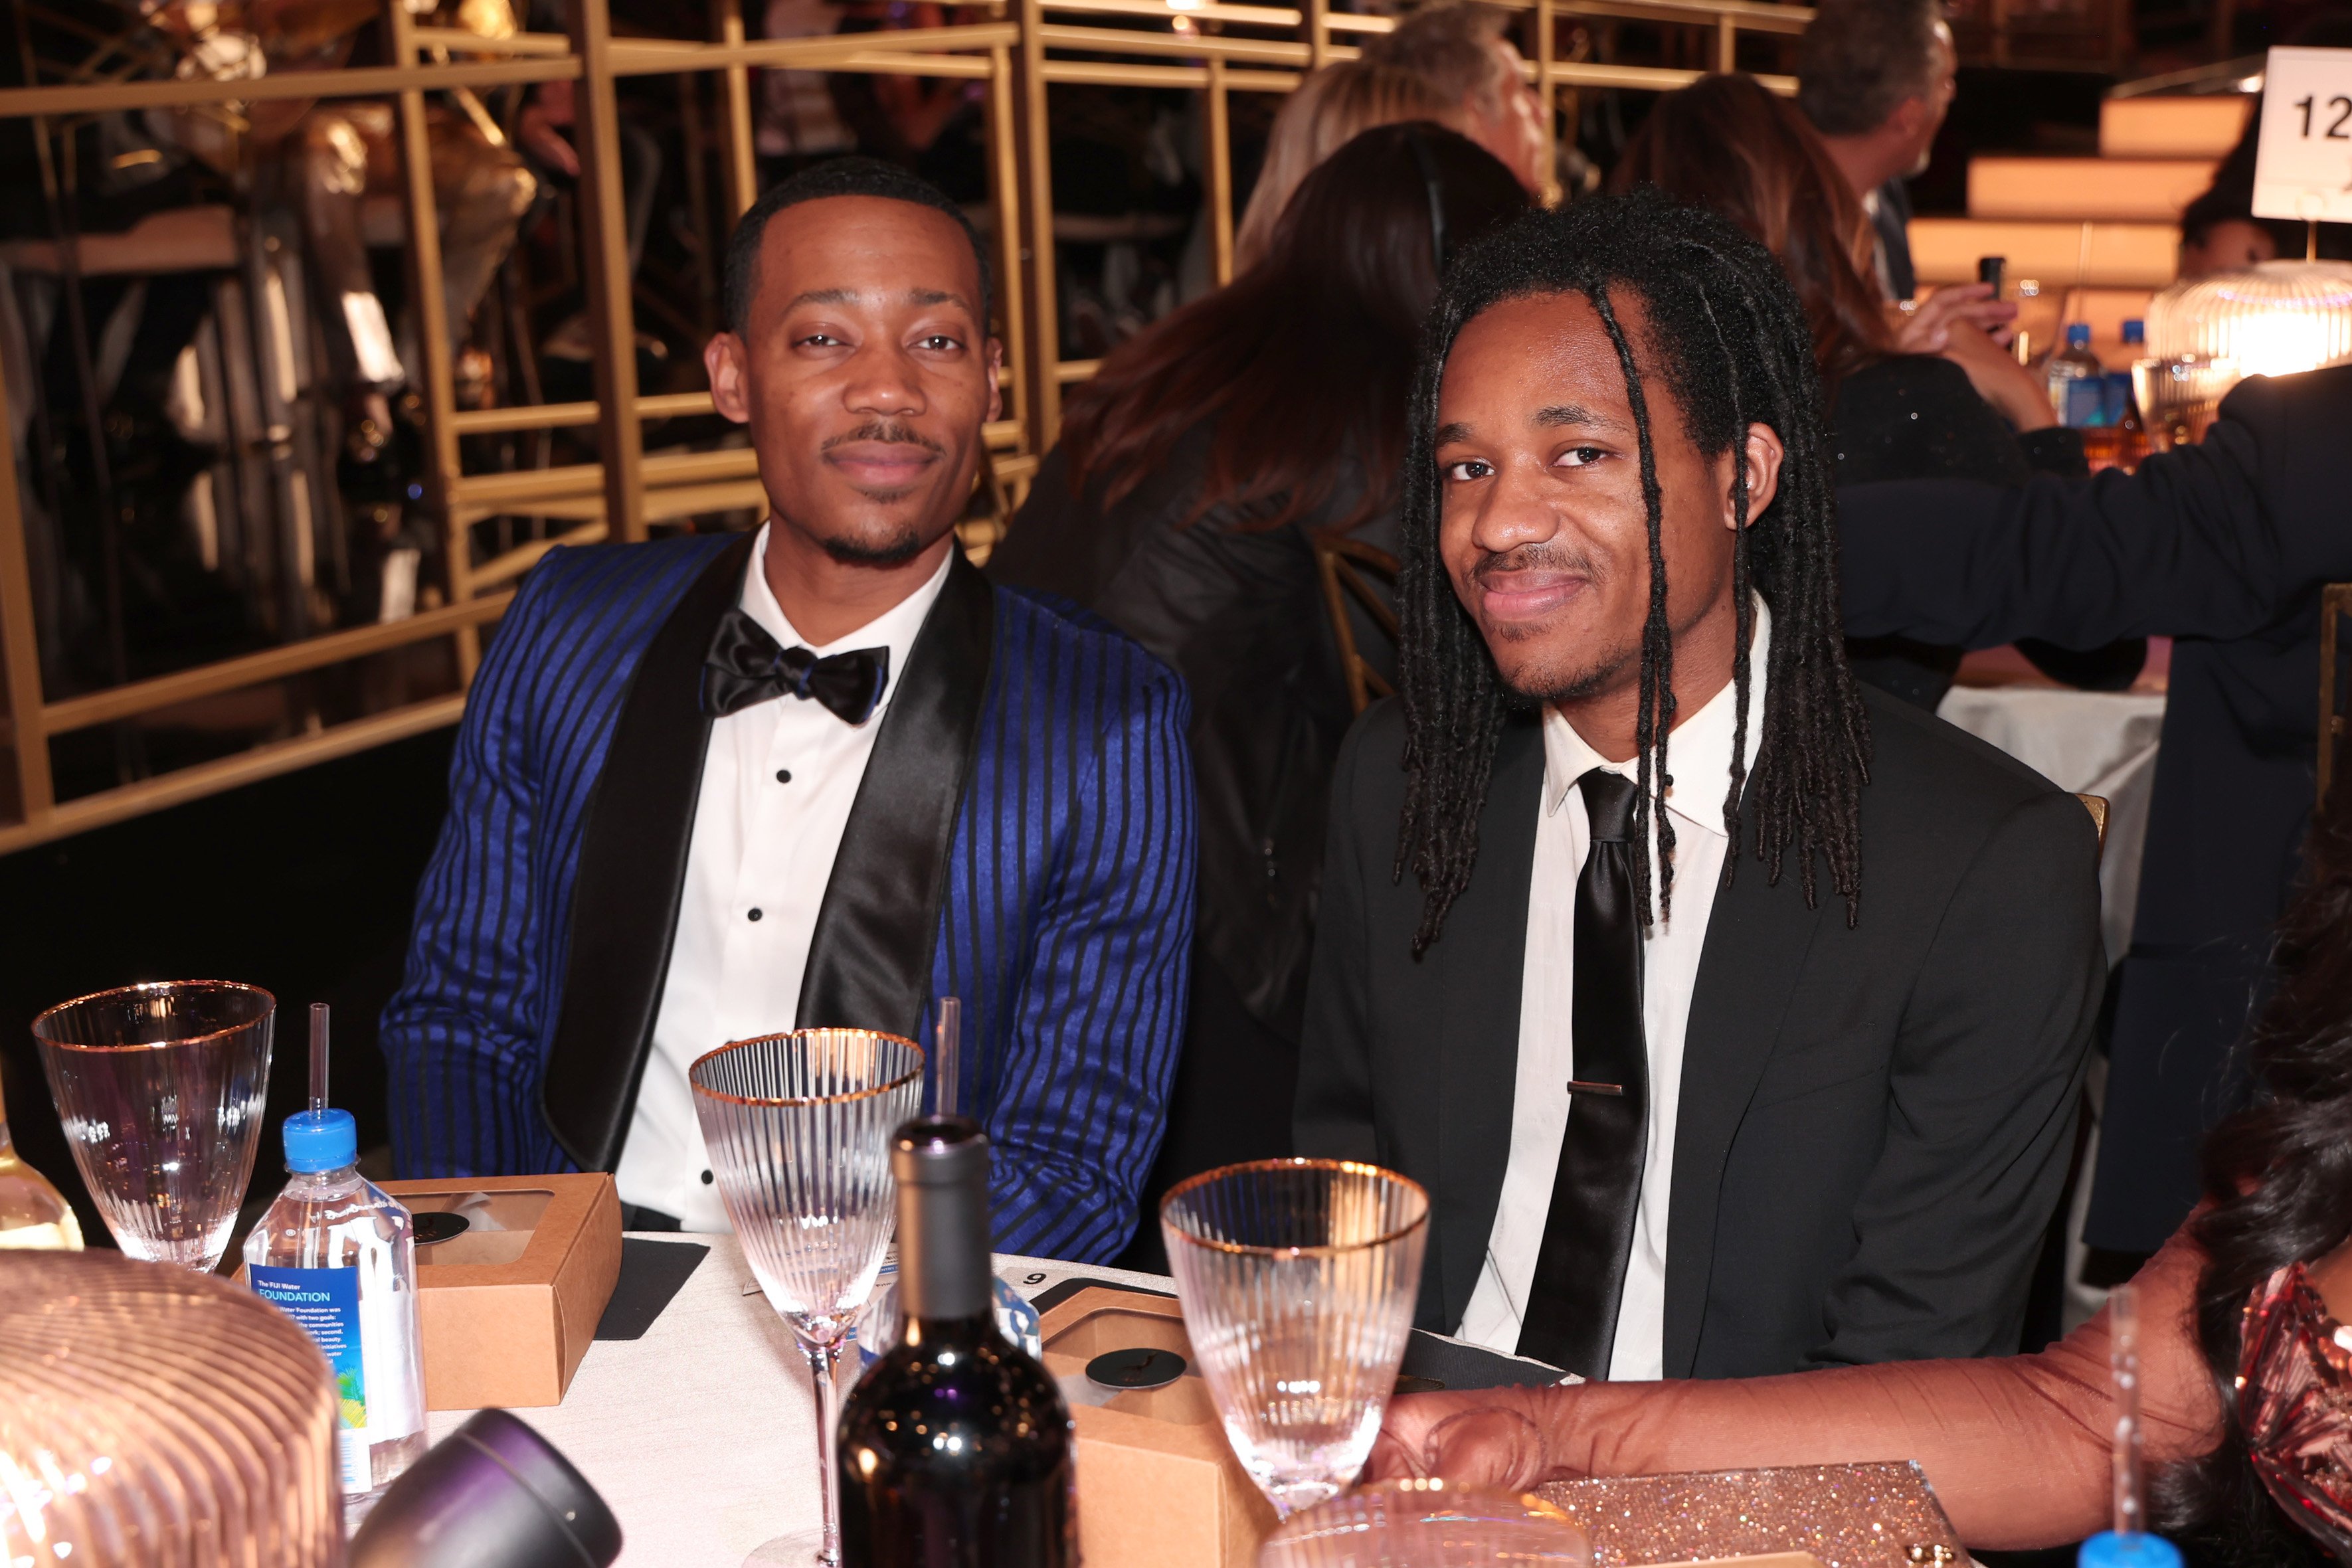 Tyler James Williams and Tylen Jacob Williams at the 74th Annual Primetime Emmy Awards in September, 2022. | Source: Getty Images